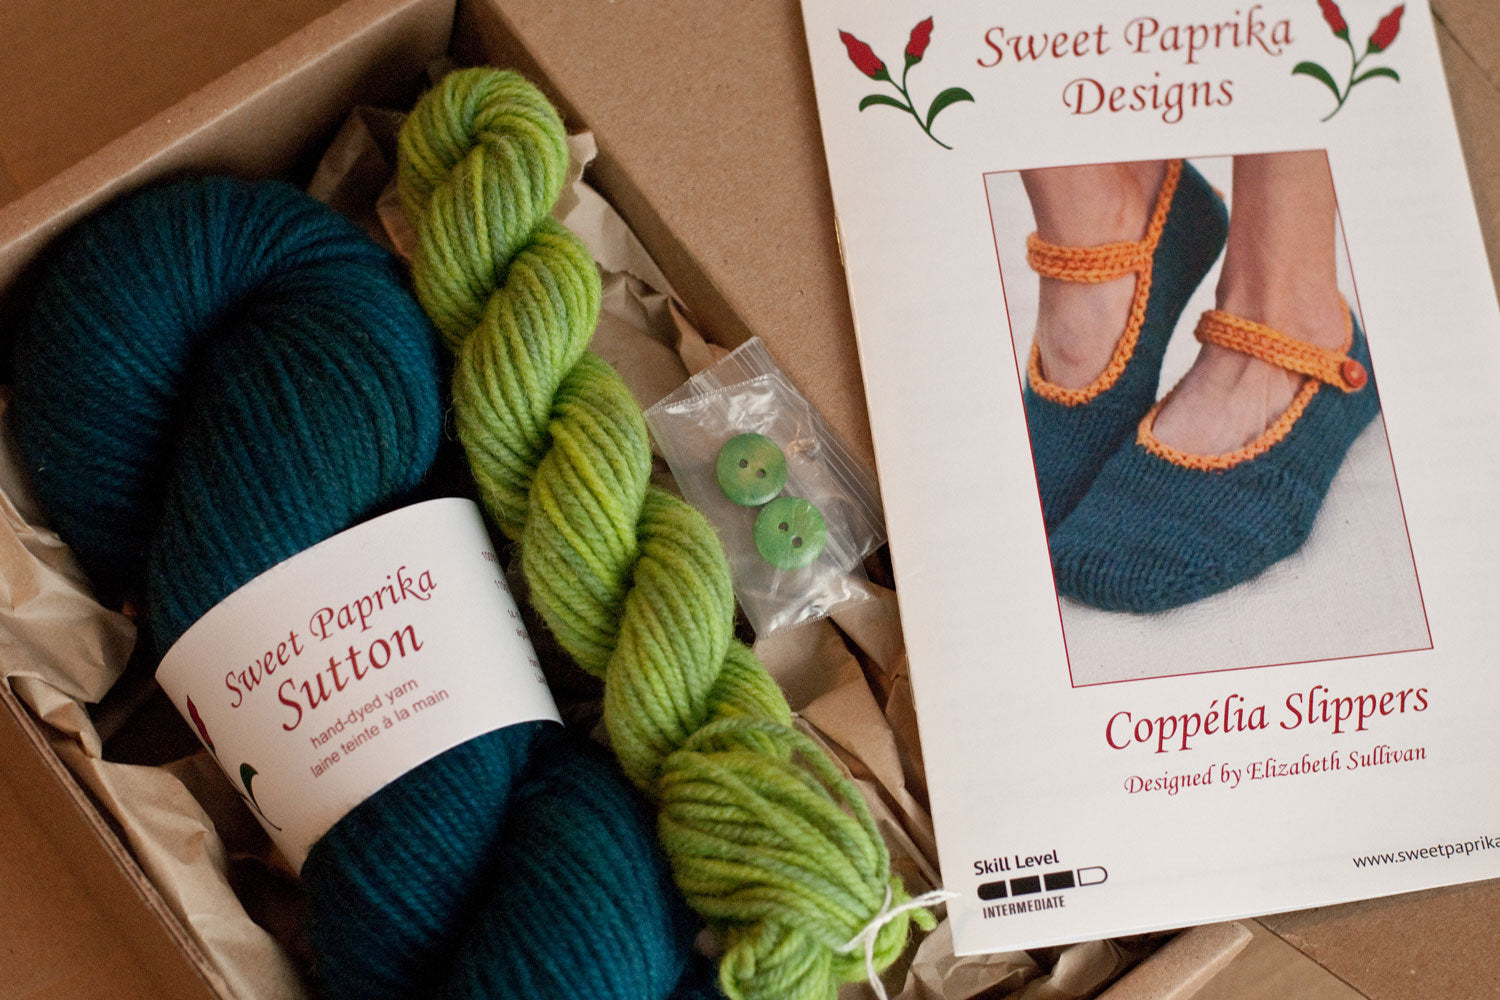 open cardboard box with kit components: pattern, large skein, mini skein and buttons